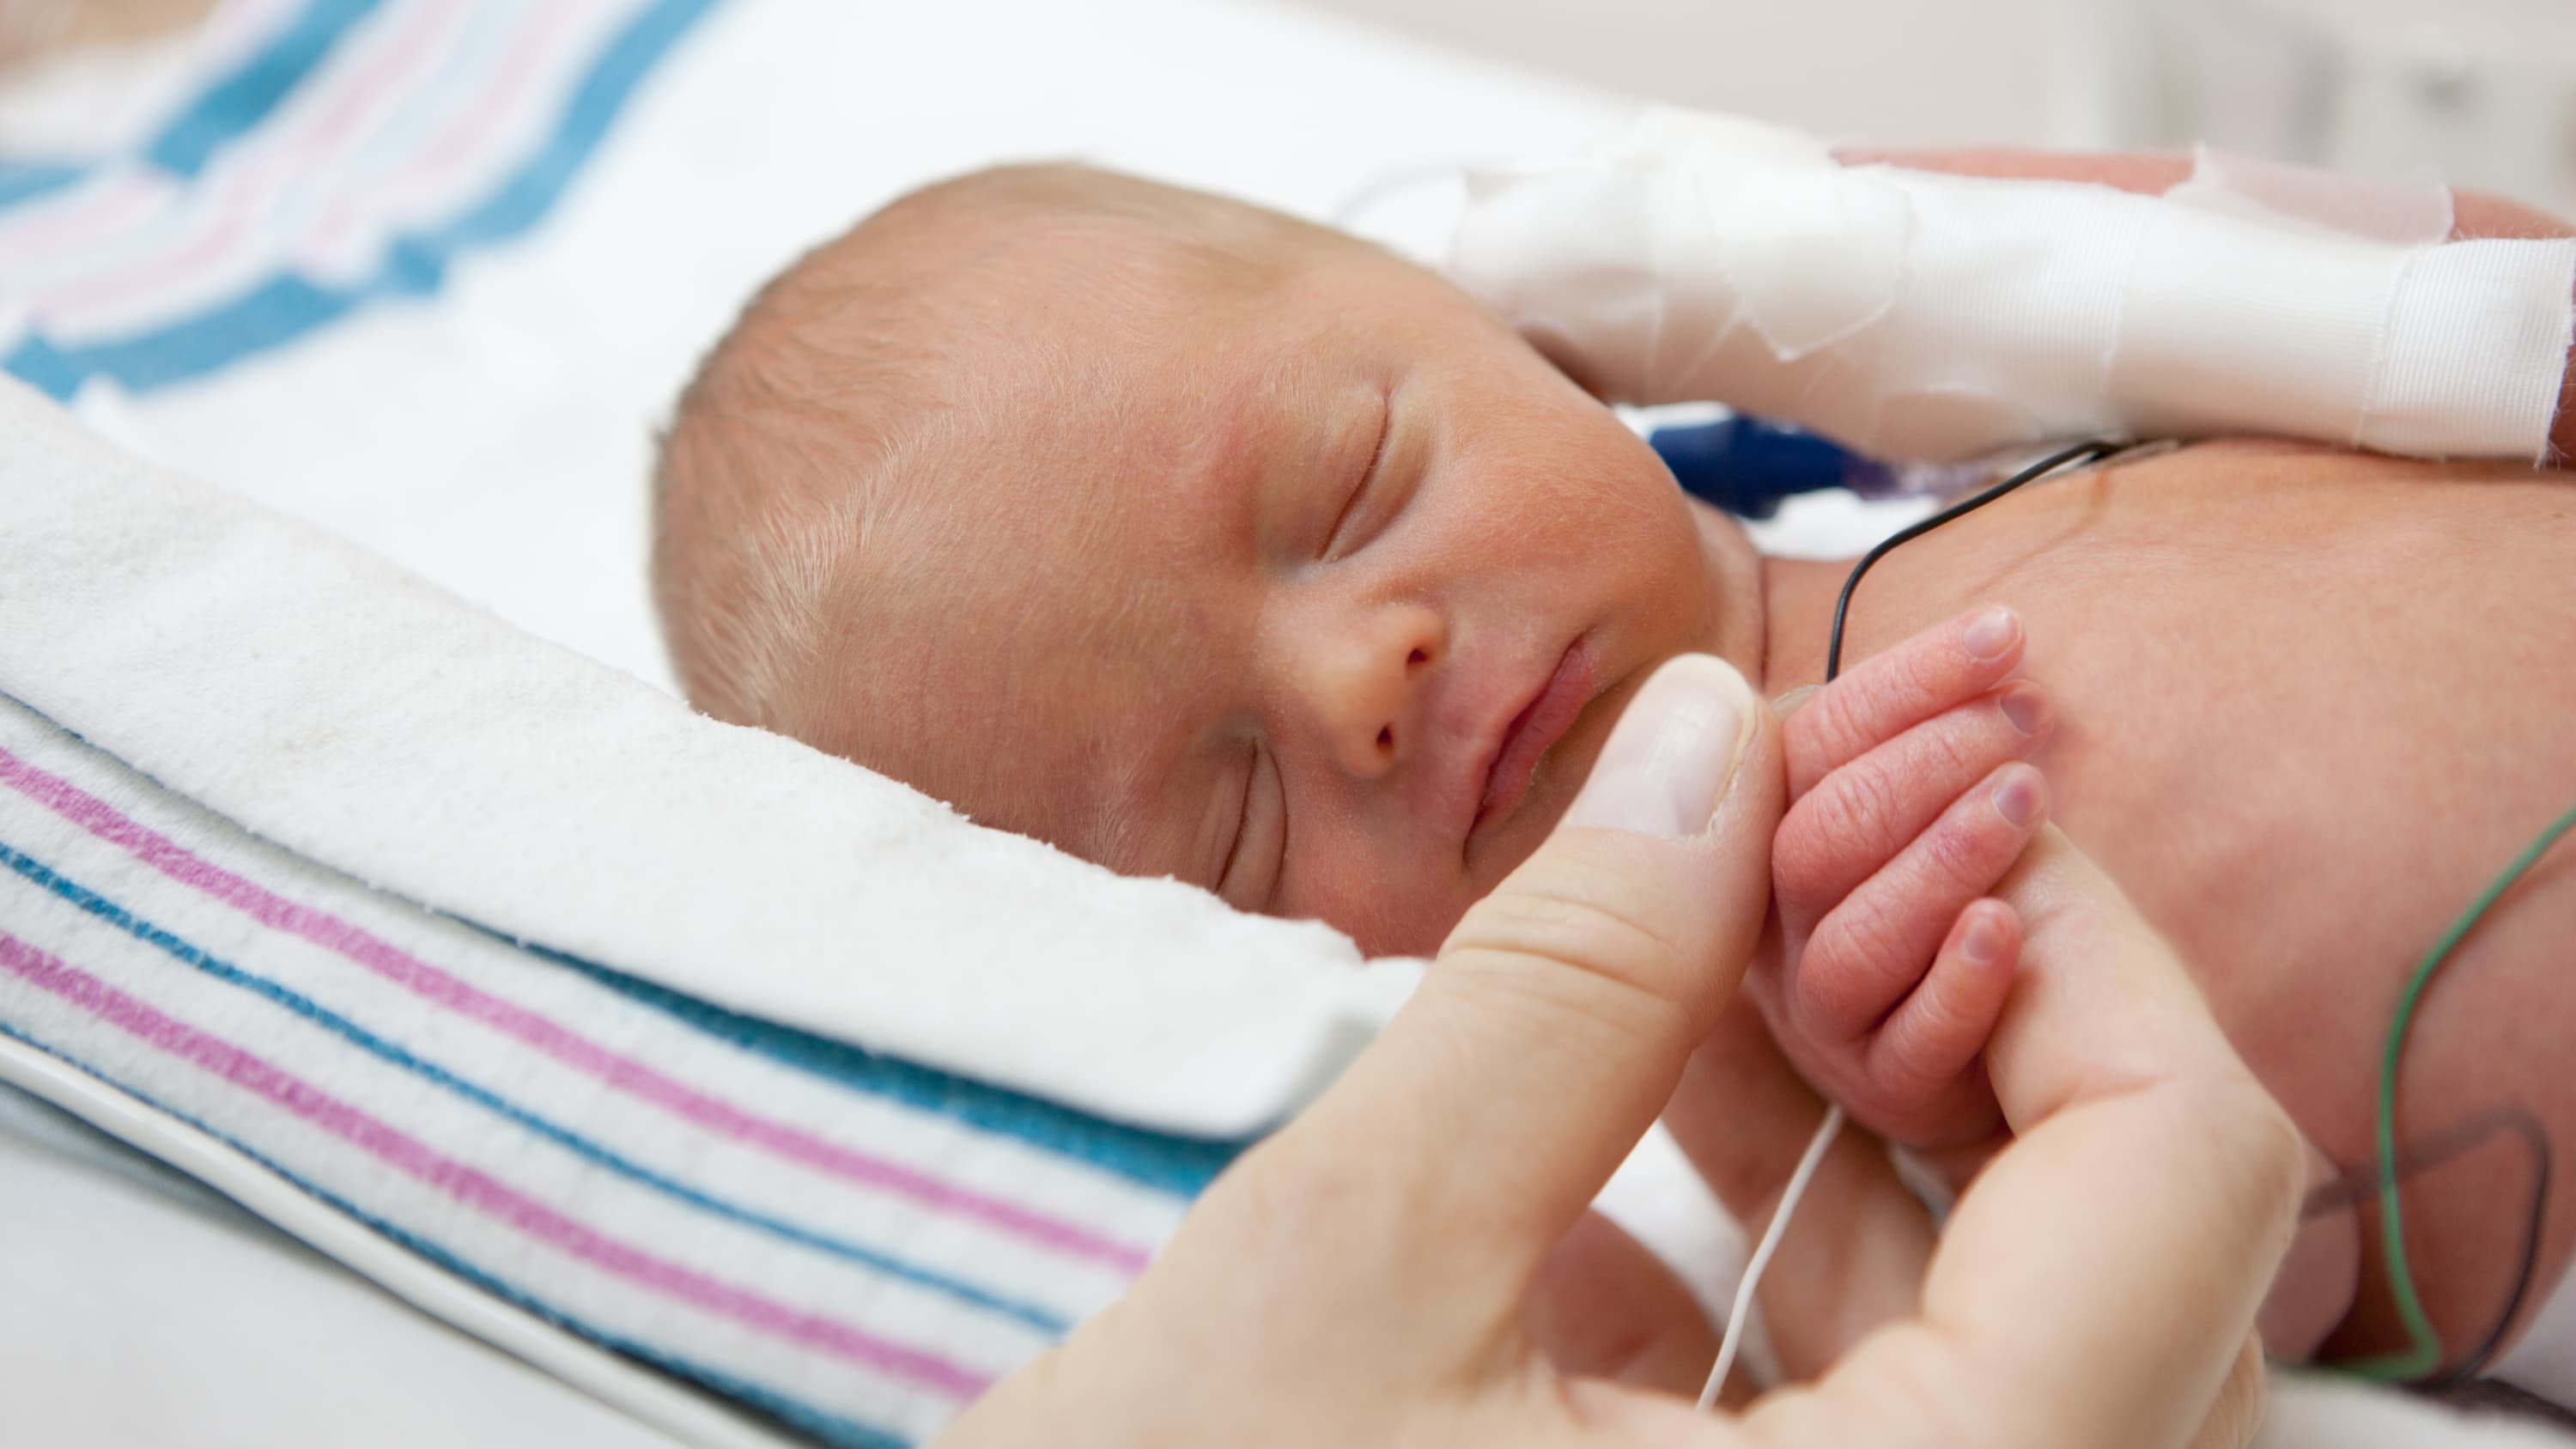 A caregiver holds a newborn's hand in the NICU--preventing infections in the NICU is an important concern